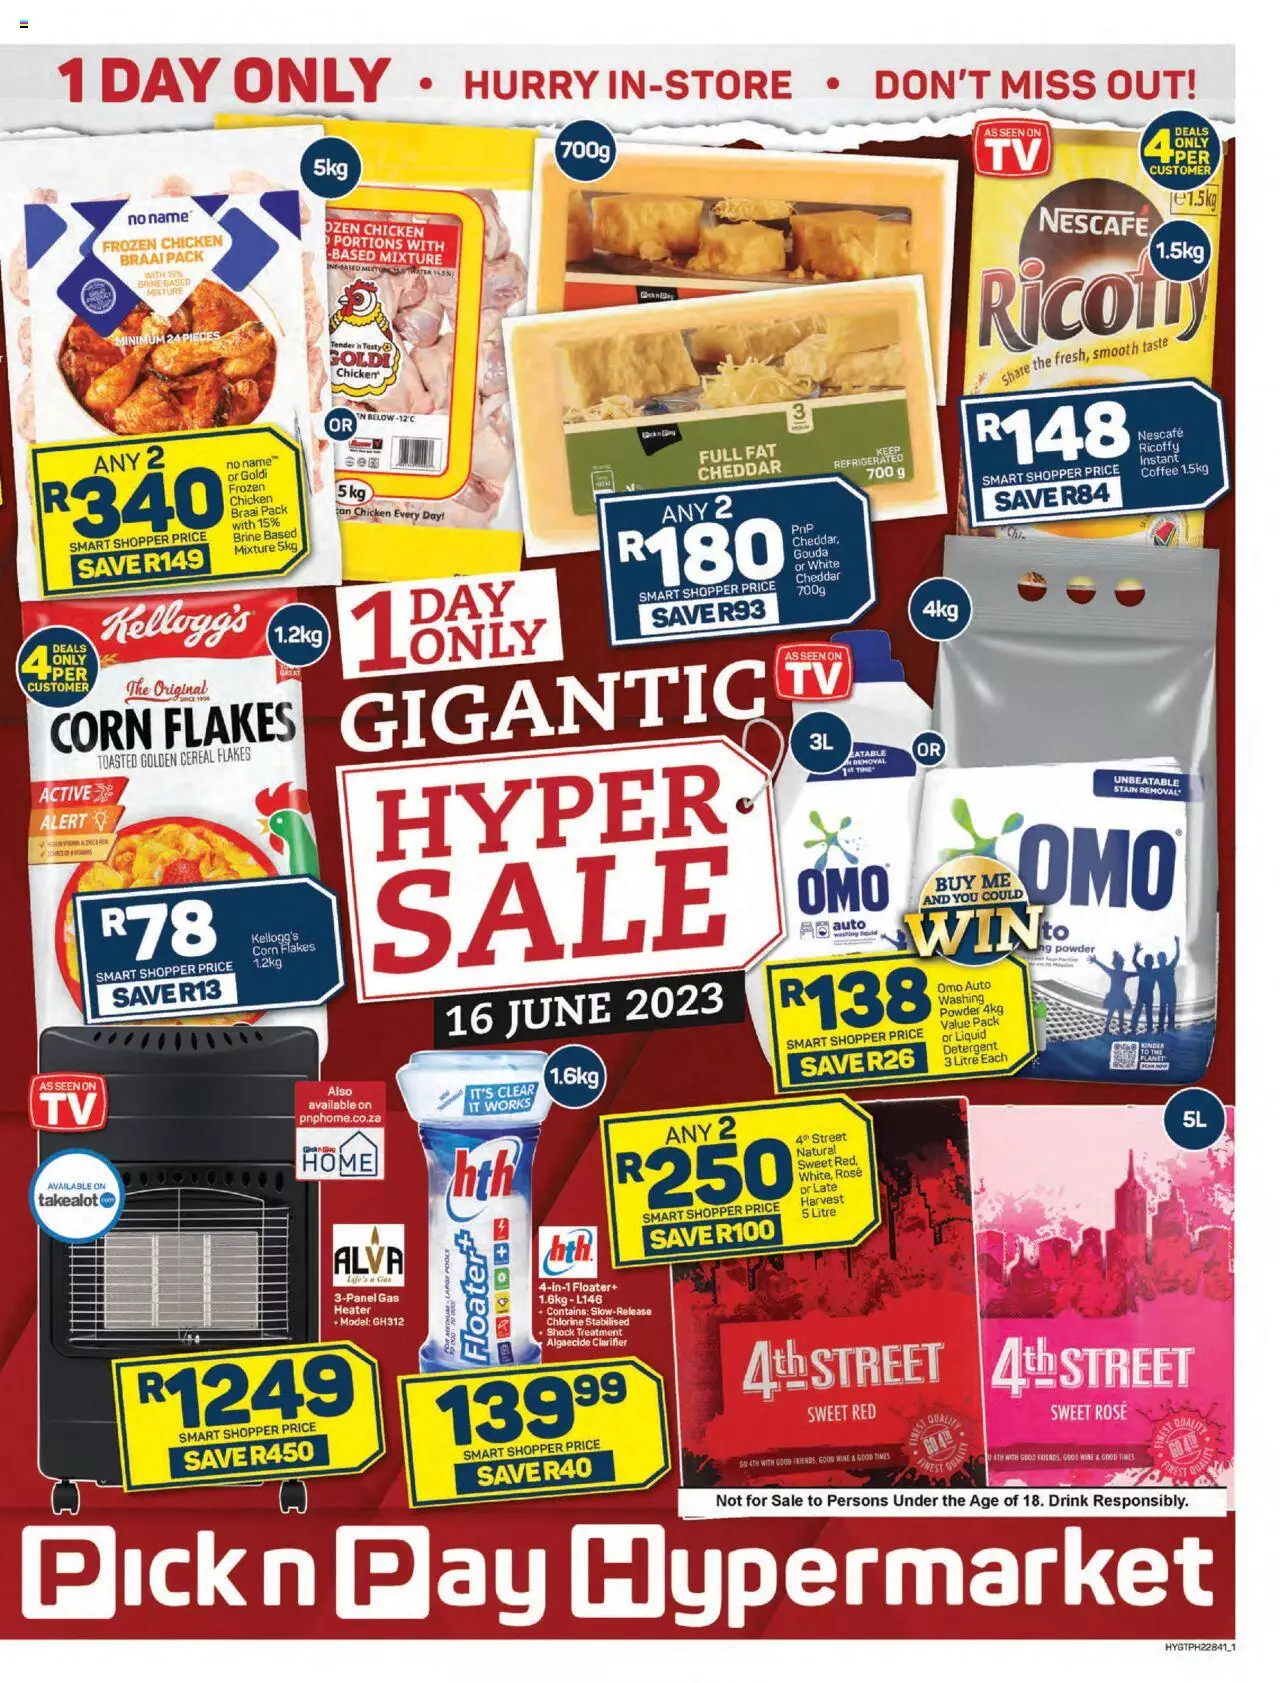 Pick n Pay Specials Hyper Sale 16 June 2023